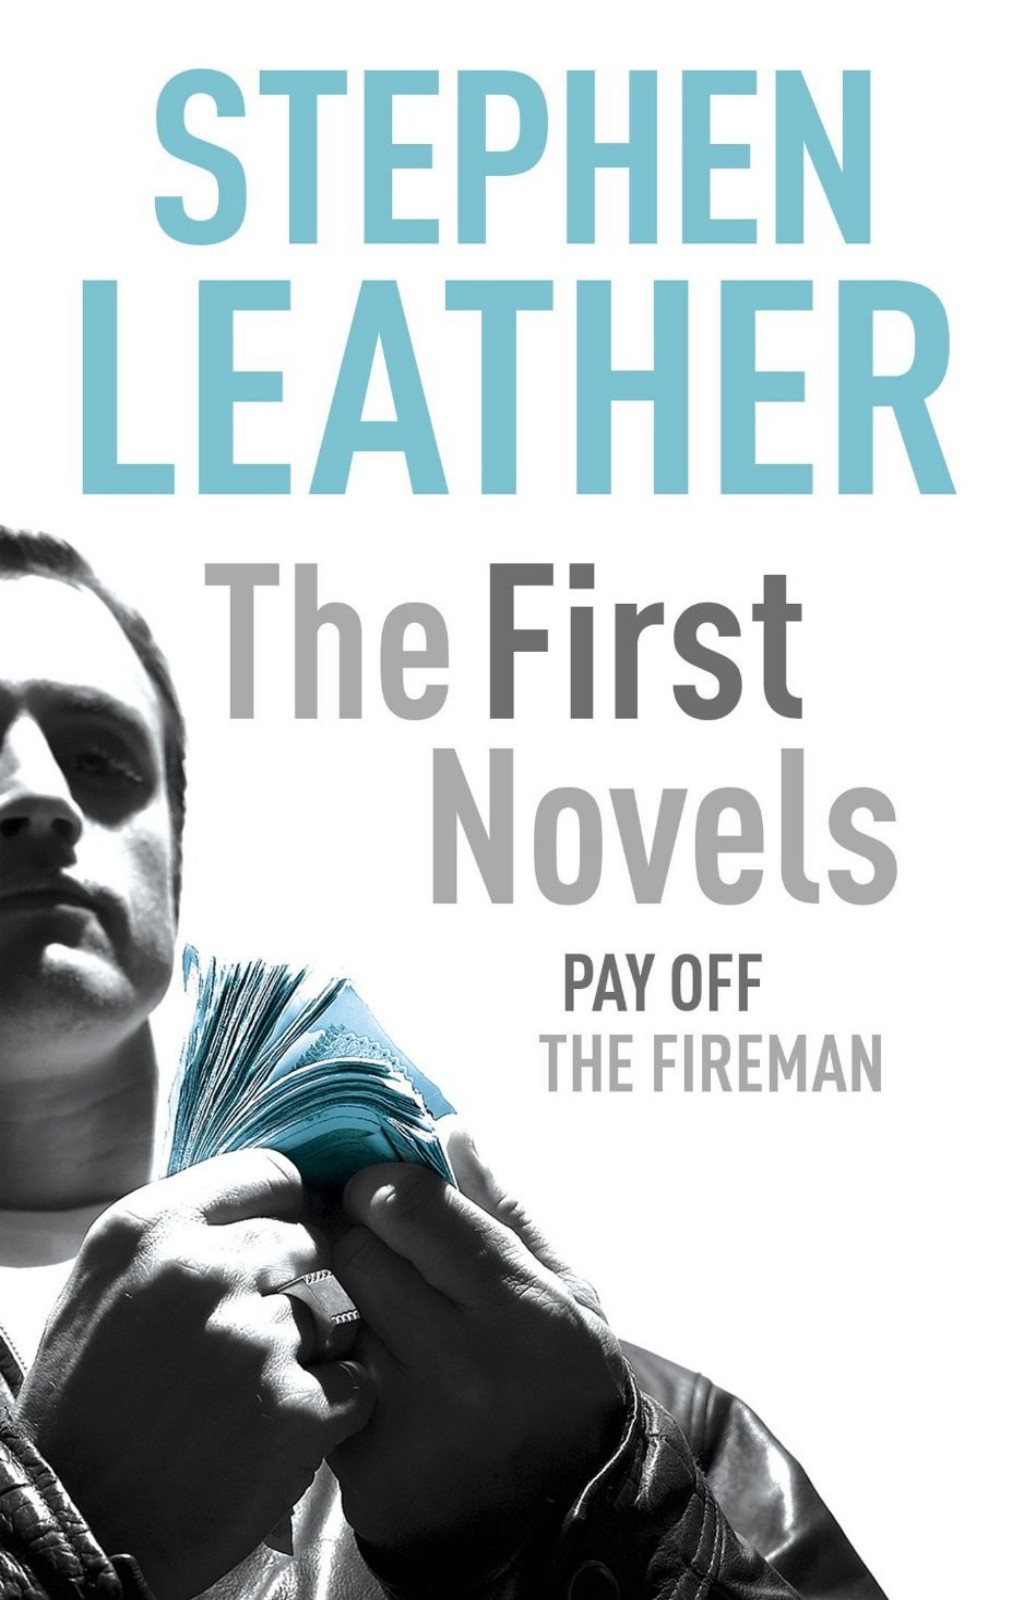 The First Novels: Pay Off, the Fireman by Stephen Leather